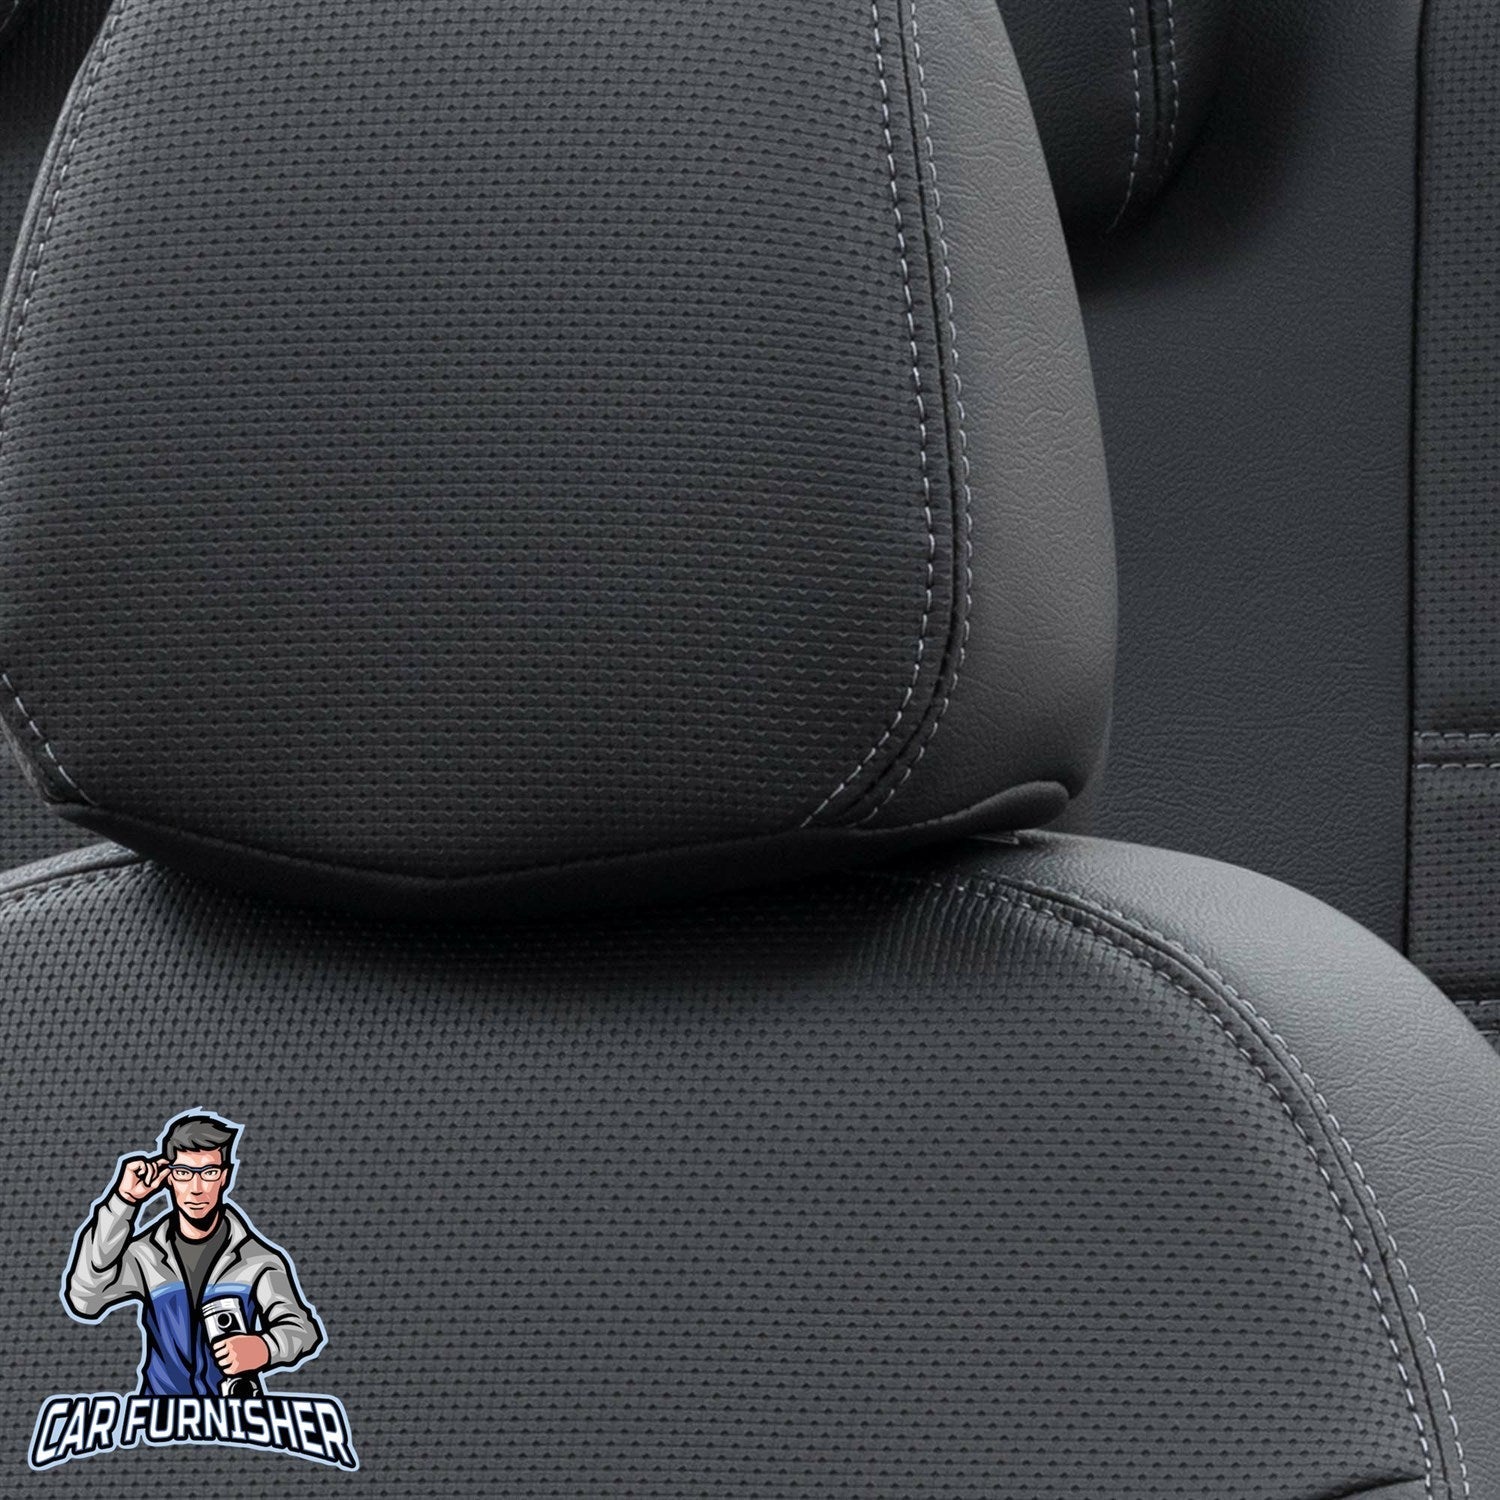 Citroen C2 Seat Covers New York Leather Design Black Leather